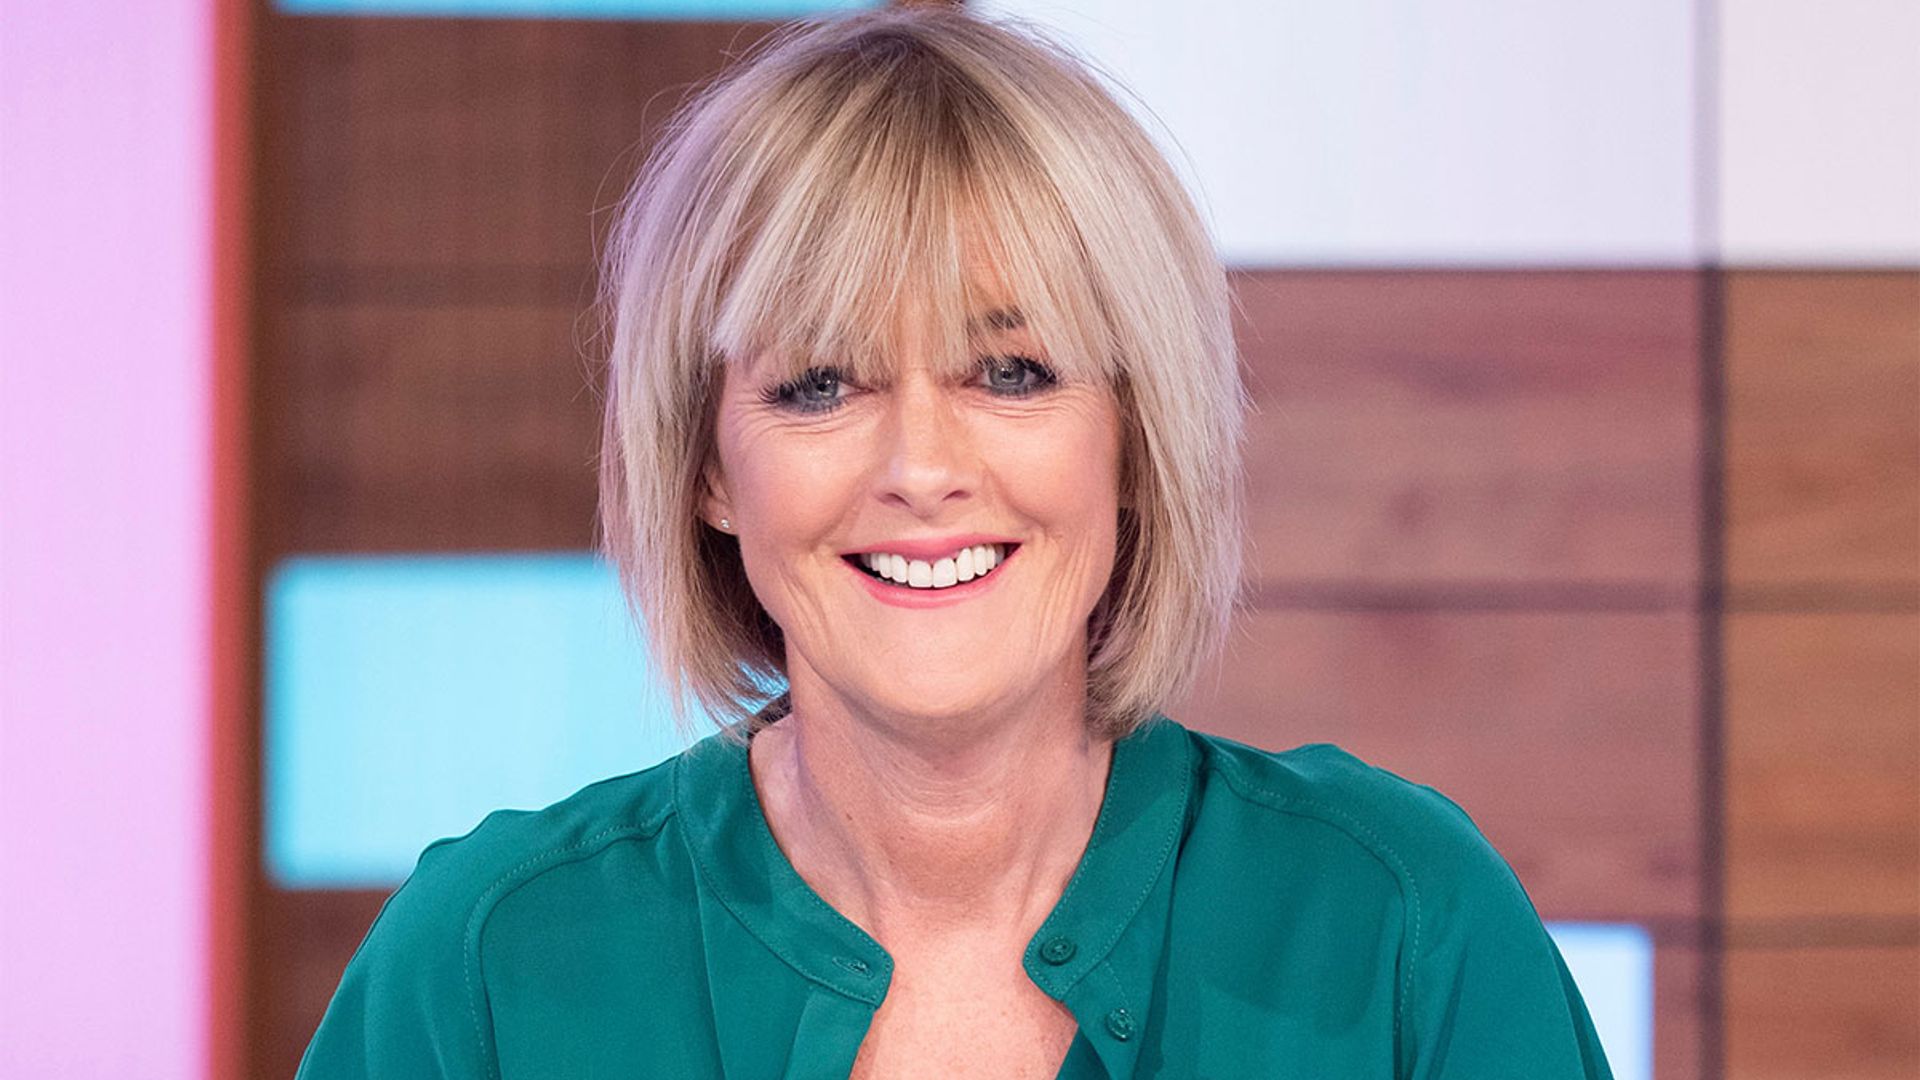 Jane Moore dresses down for Loose Women in the ultimate comfy outfit – and her M&S trousers are a bargain